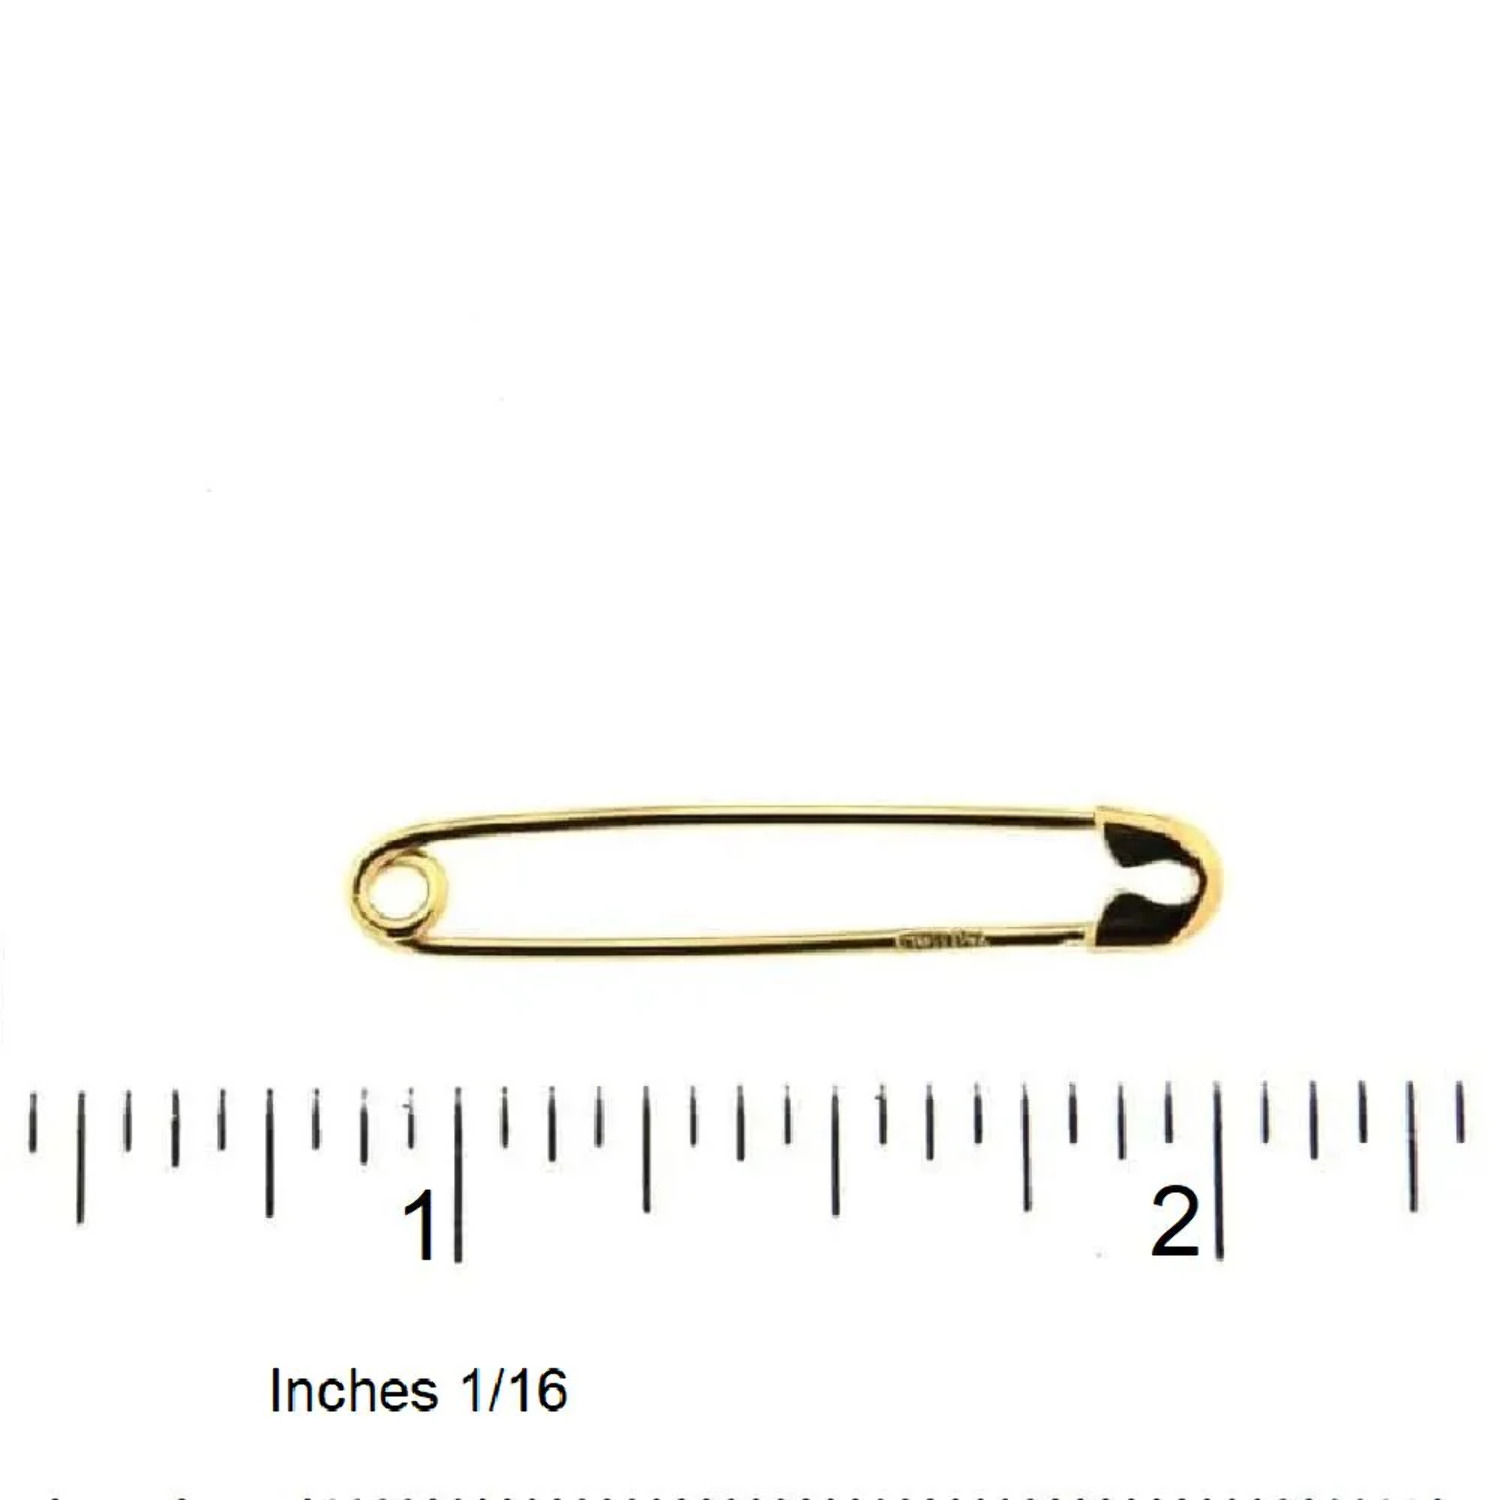 18K Solid Yellow Gold Large Safety Pin 1.30 inch - image 3 of 4